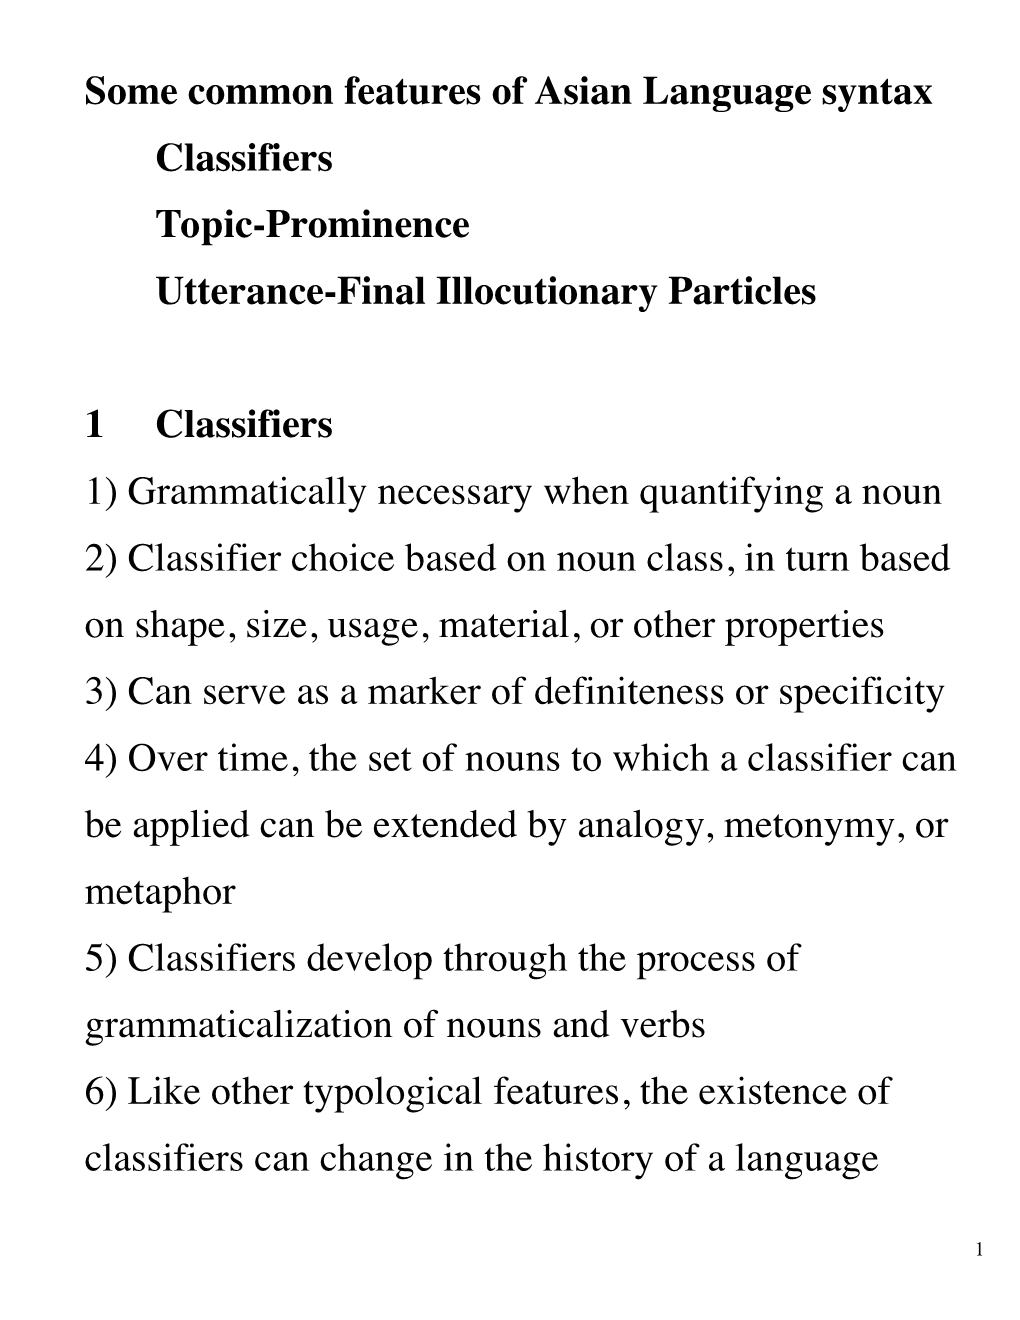 Some Common Features of Asian Language Syntax Classifiers Topic-Prominence Utterance-Final Illocutionary Particles 1 Classifiers